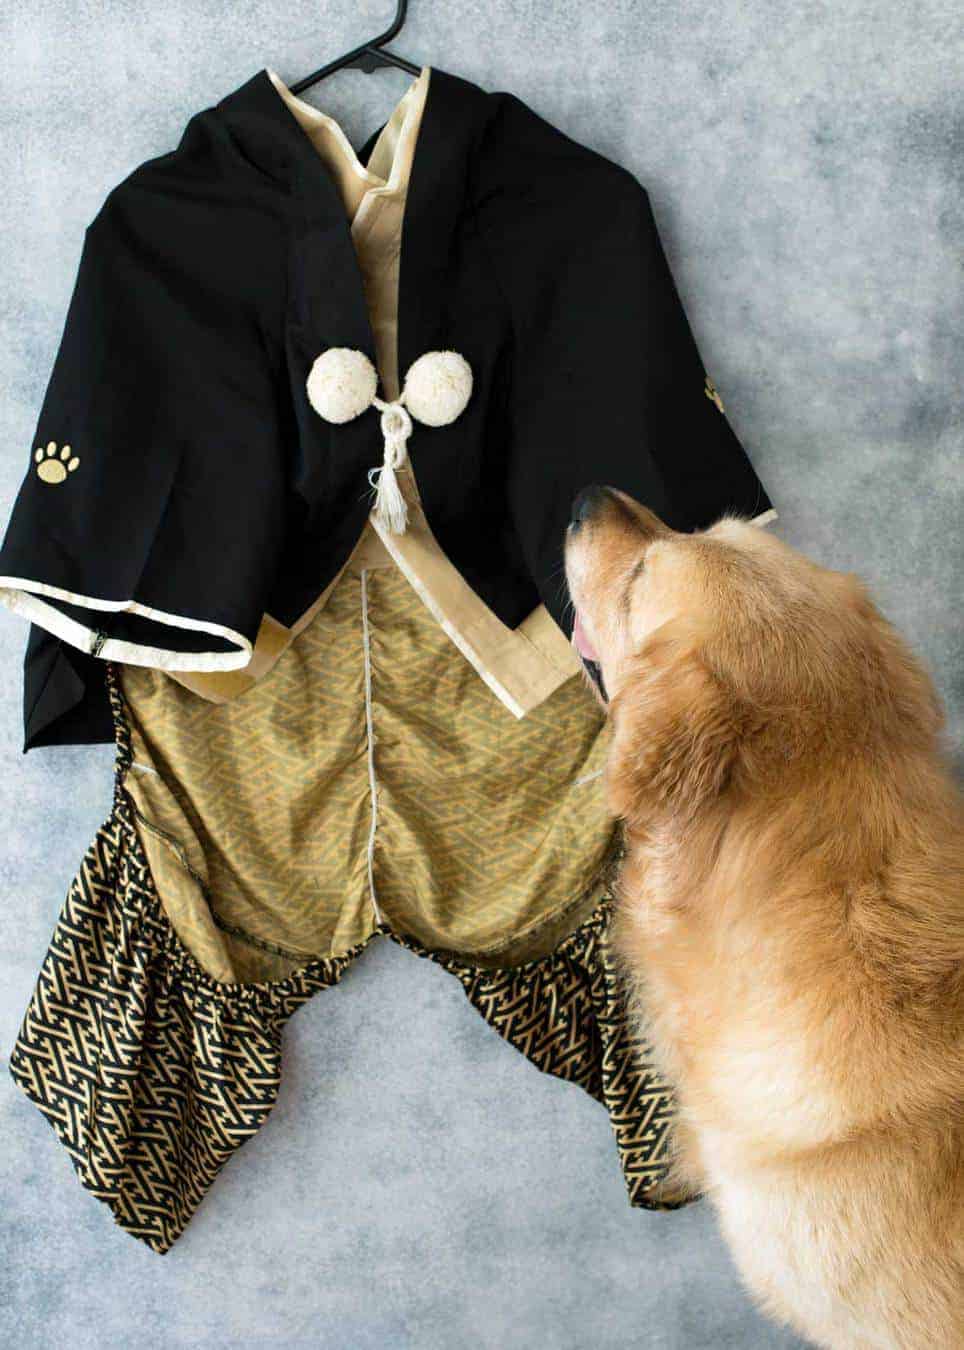 Dozer the golden retriever dog looking fearfully at dog outfit kimono